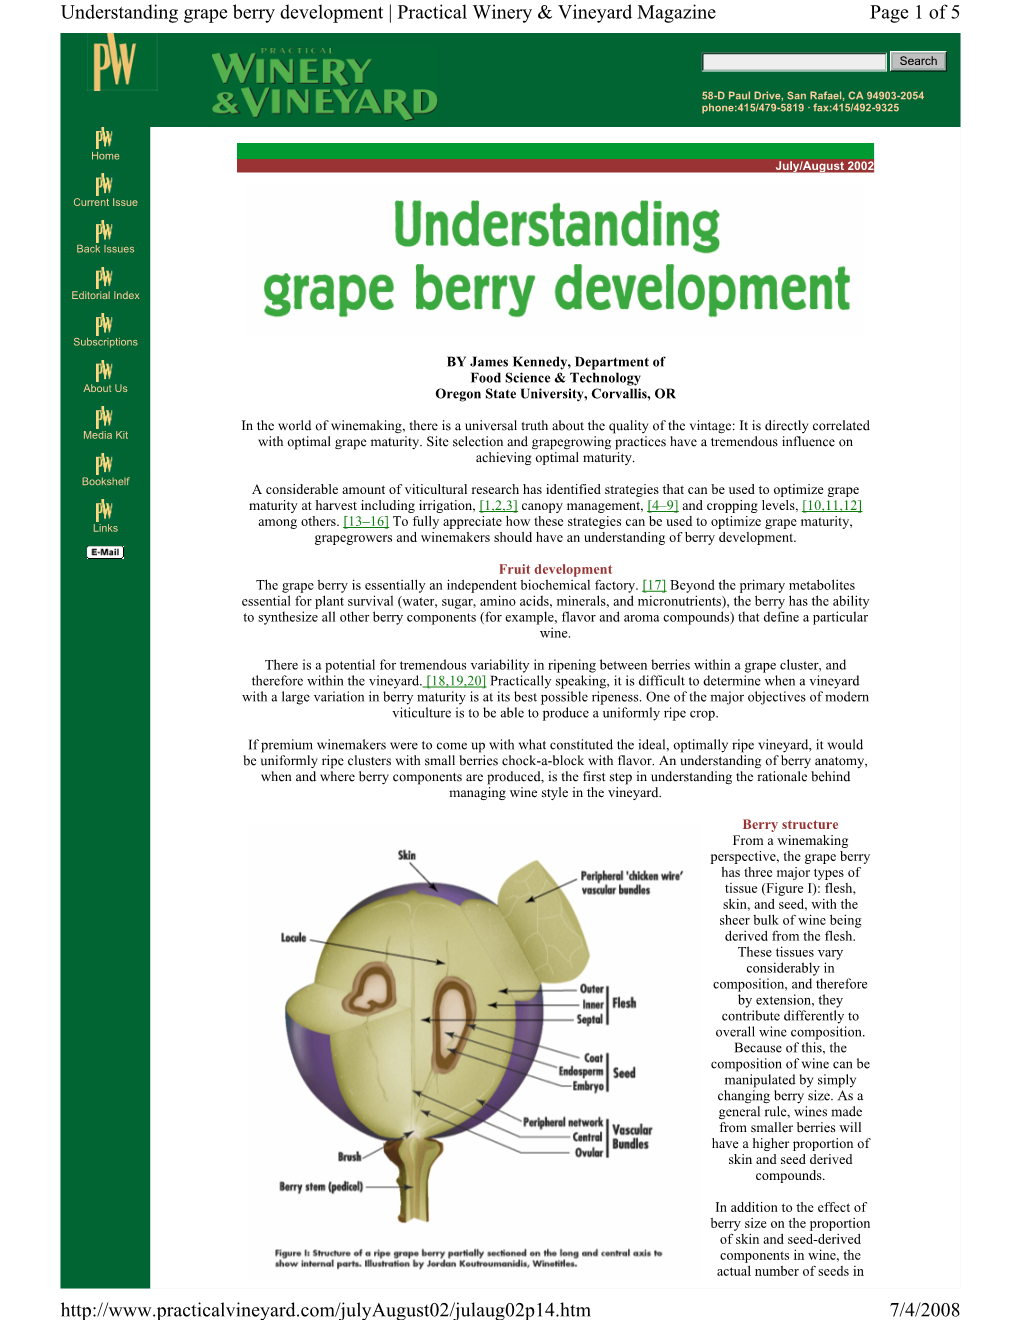 Page 1 of 5 Understanding Grape Berry